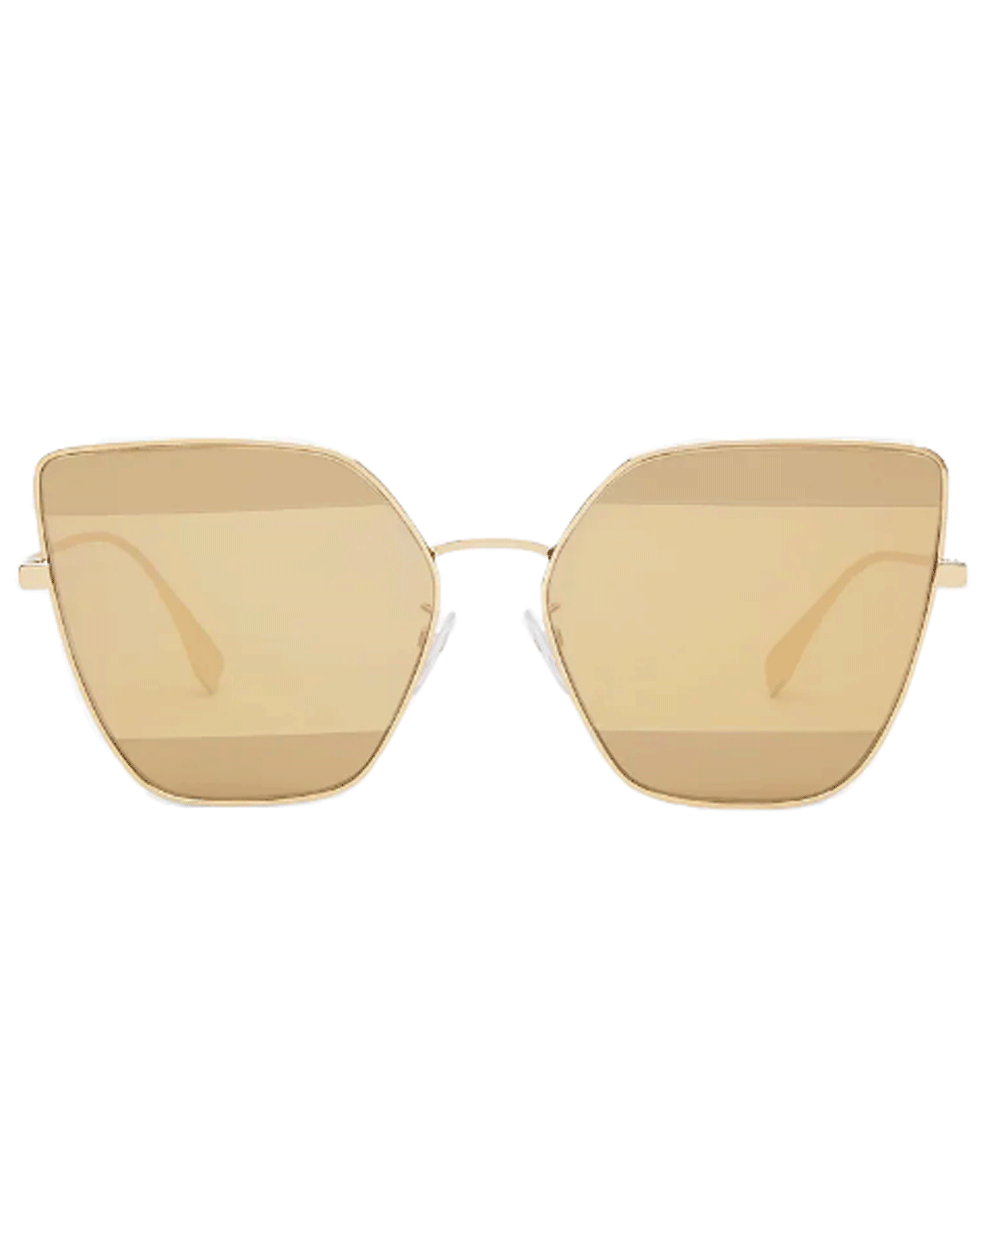 Stripes Sunglasses with Gold-Mirrored Lenses